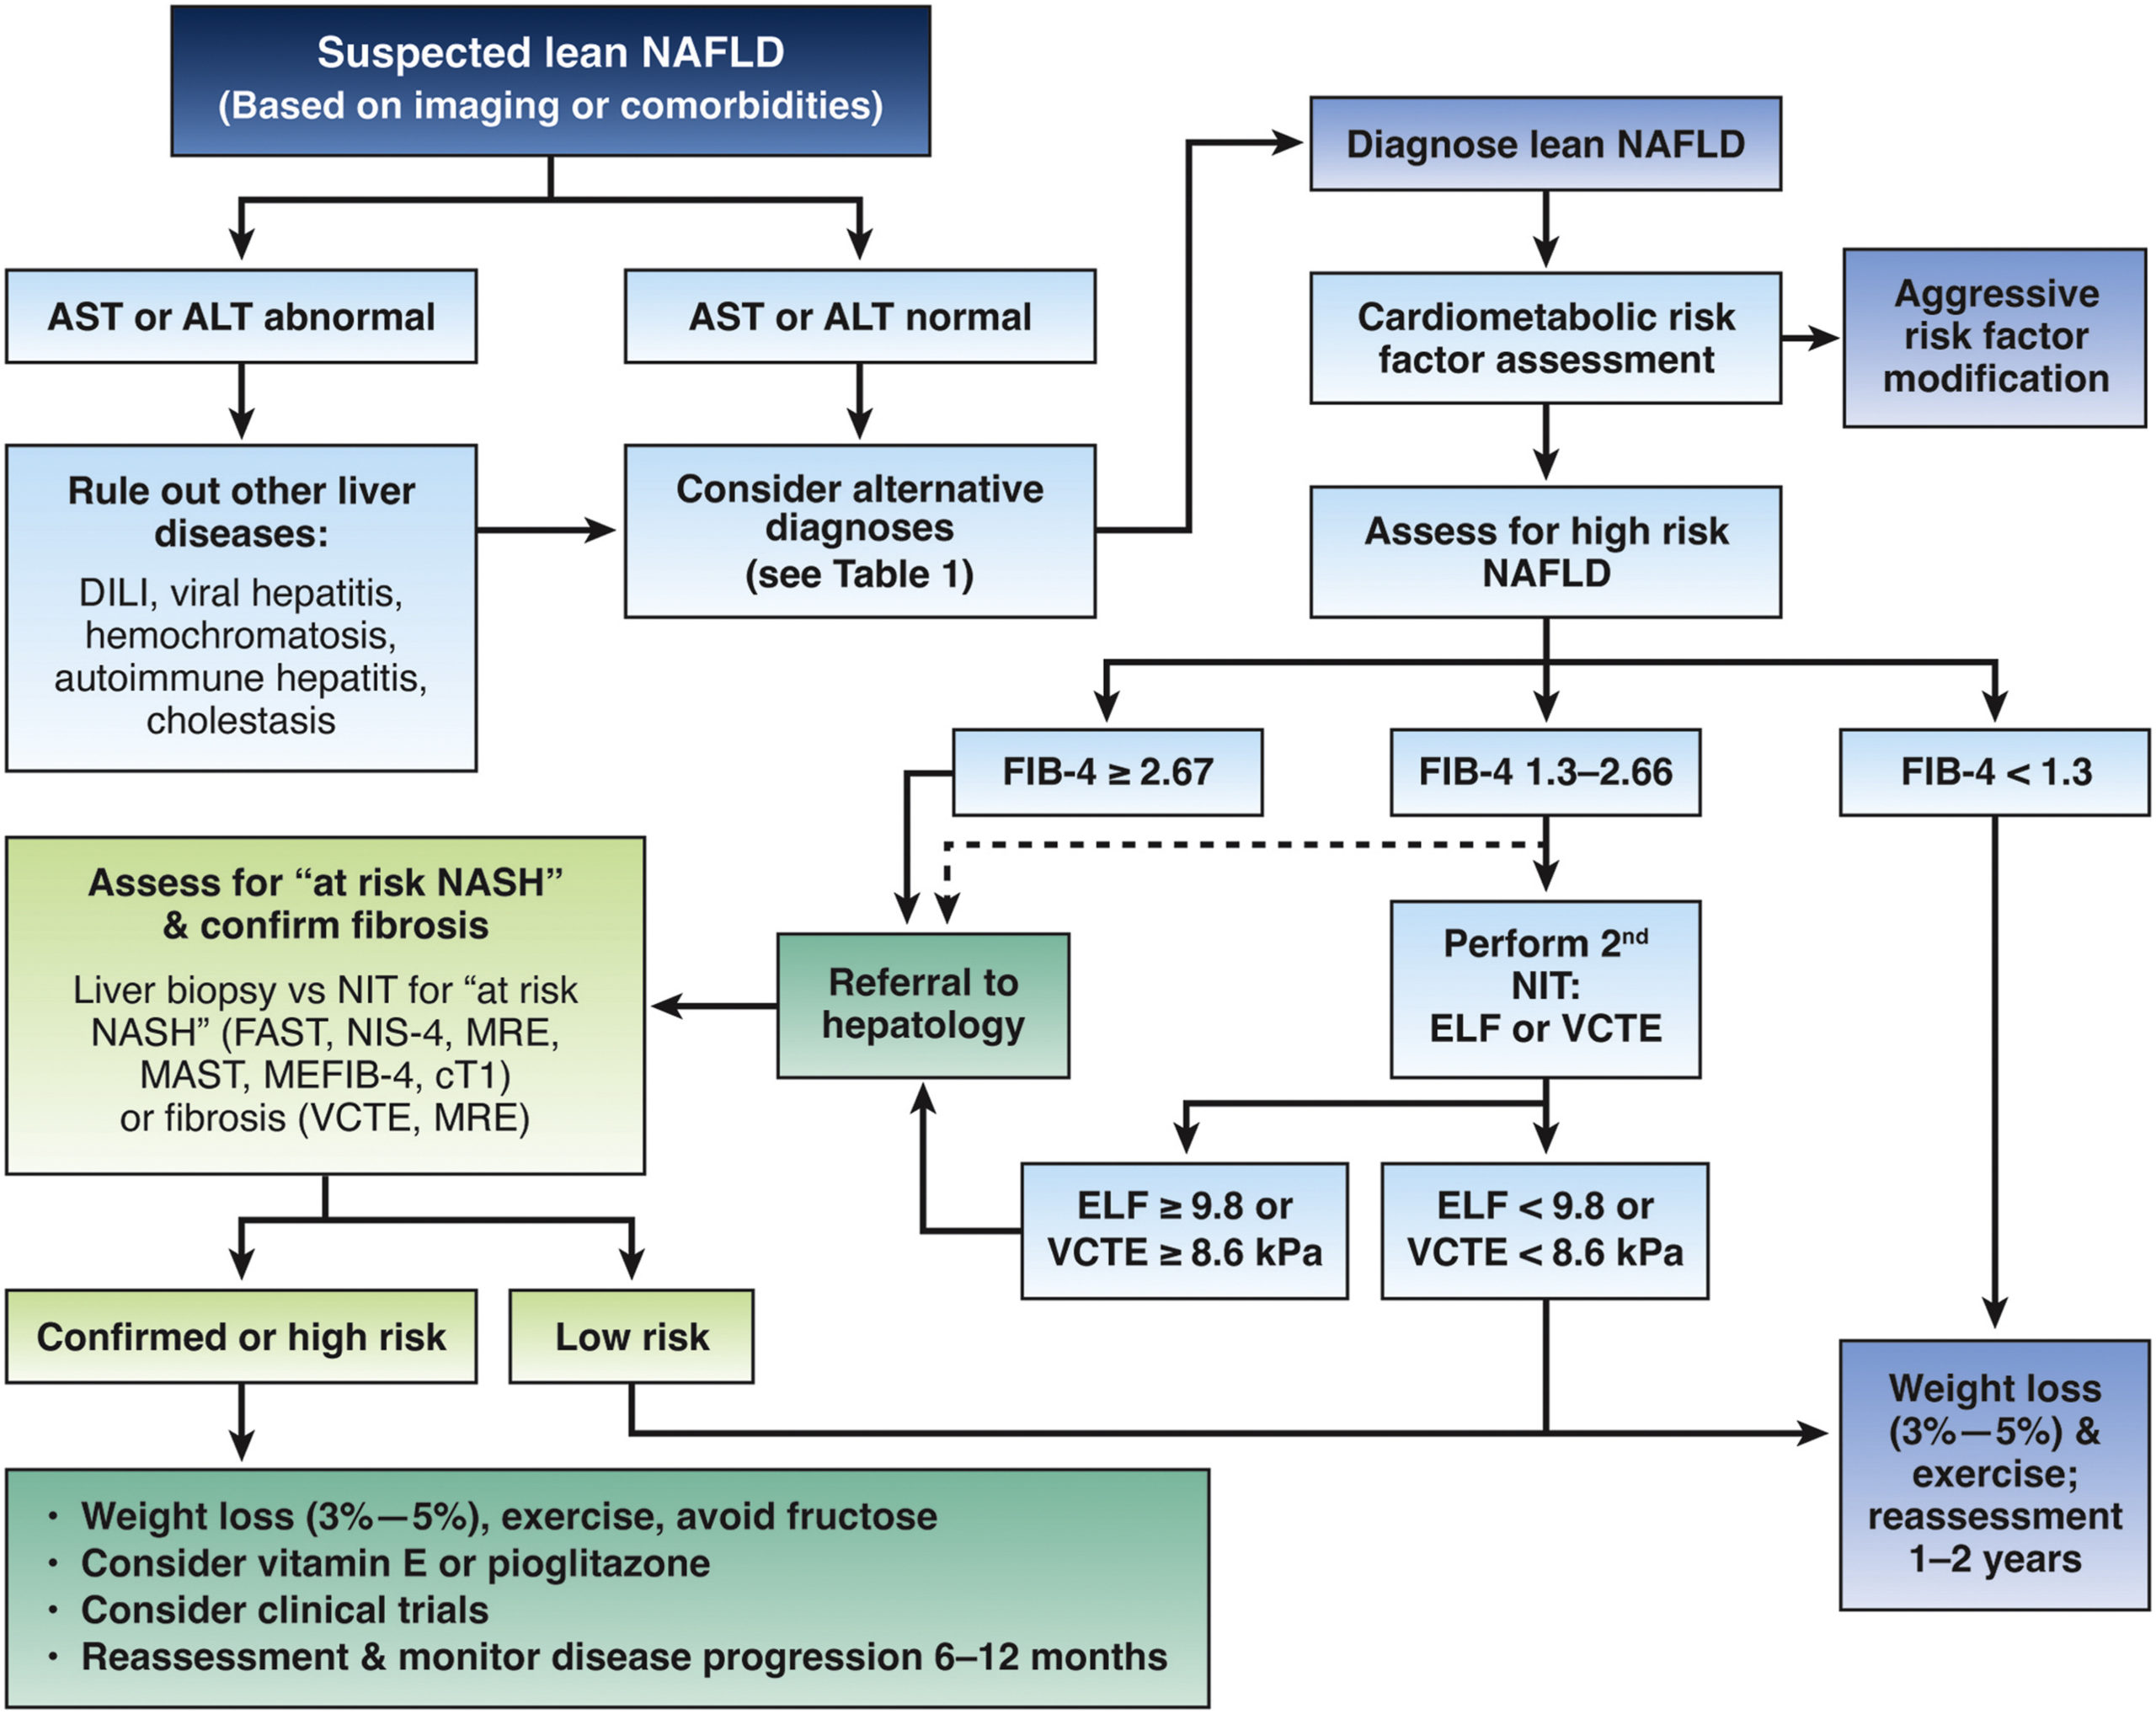 Management and treatment algorithm in patients with suspected lean NAFLD.